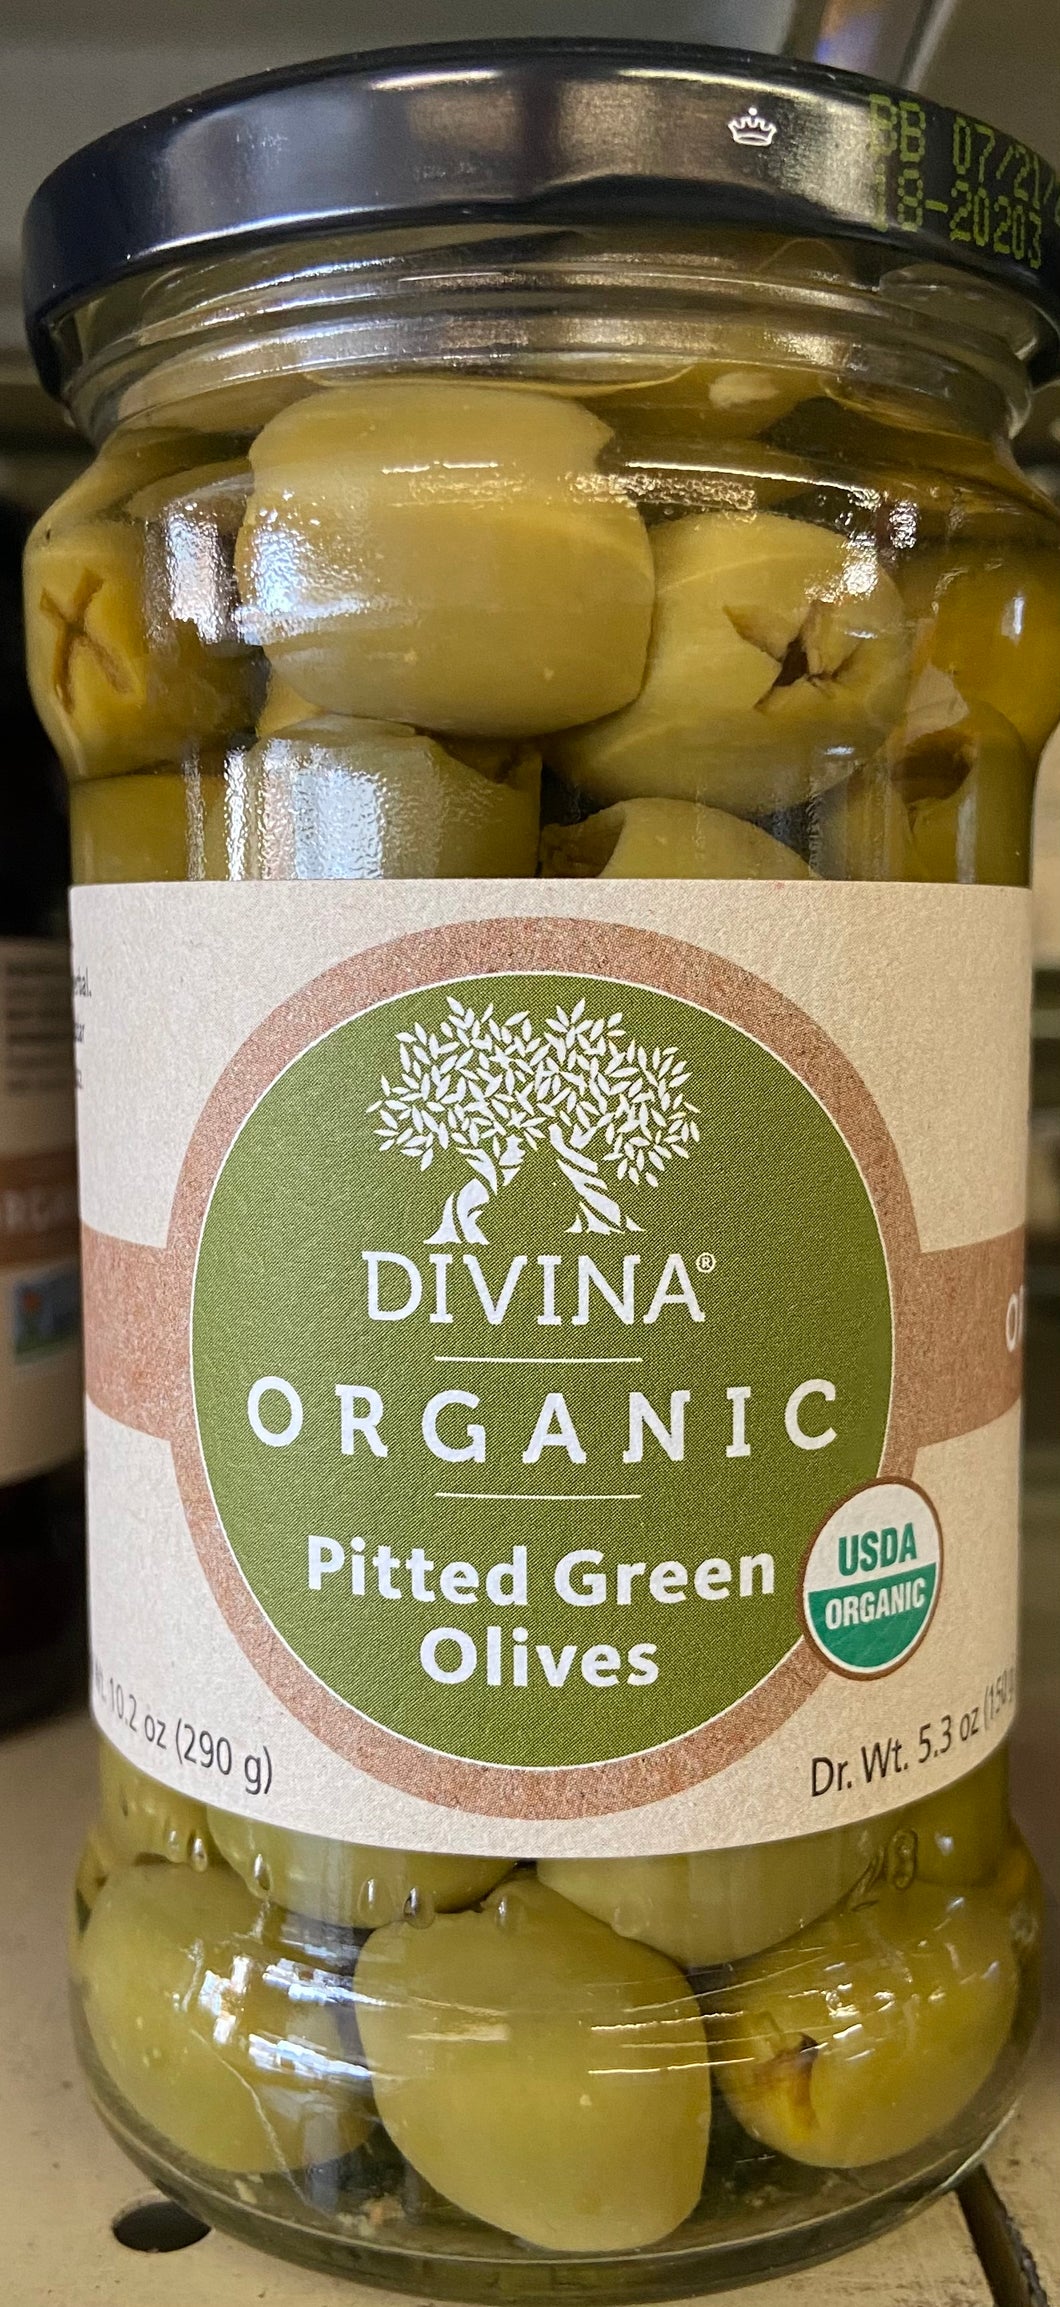 Olives, Green Pitted, Organic, Divina, 6 oz